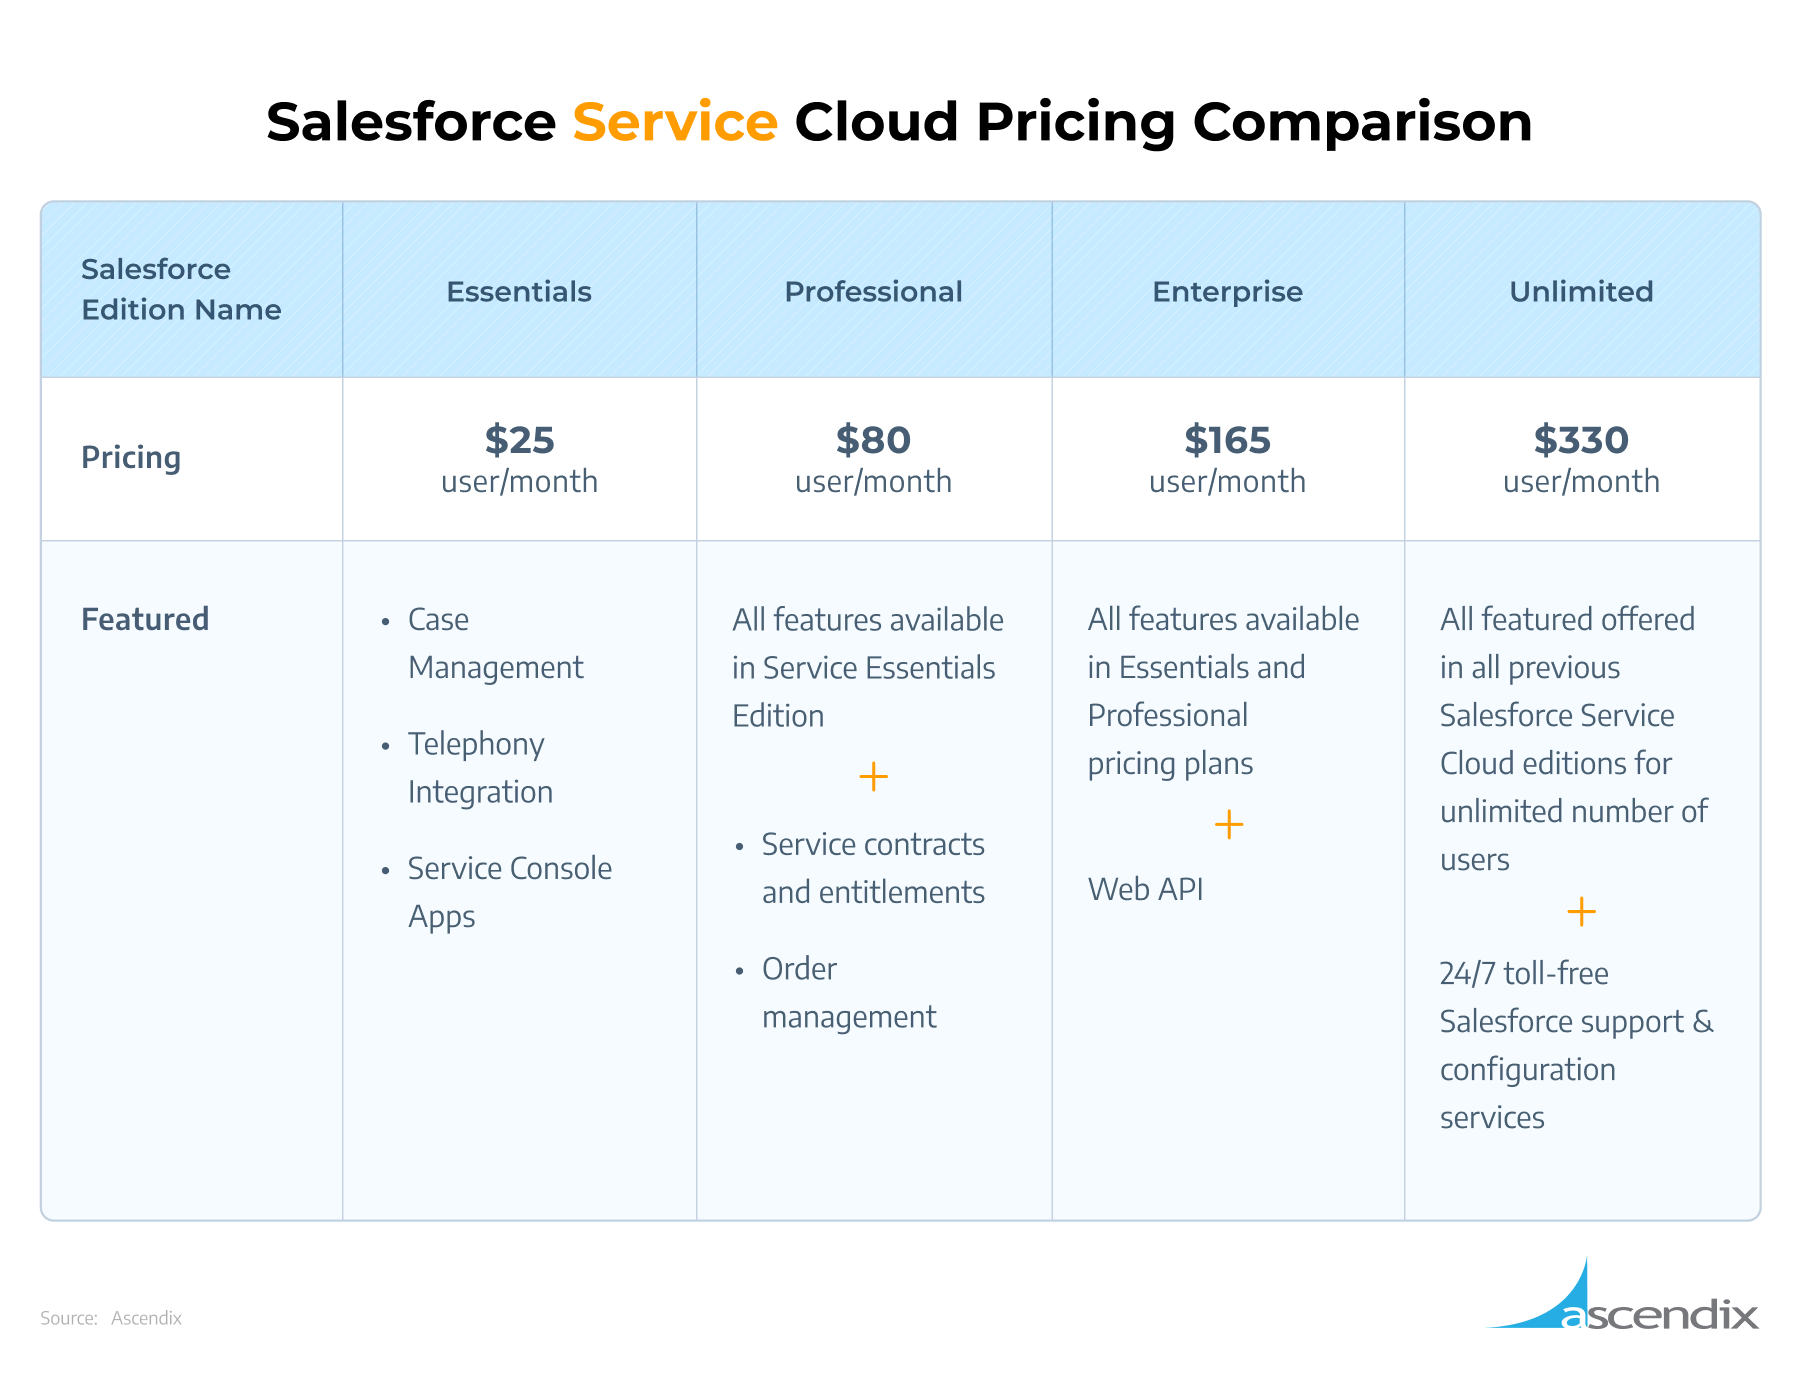 How to Calculate True Salesforce Implementation Cost